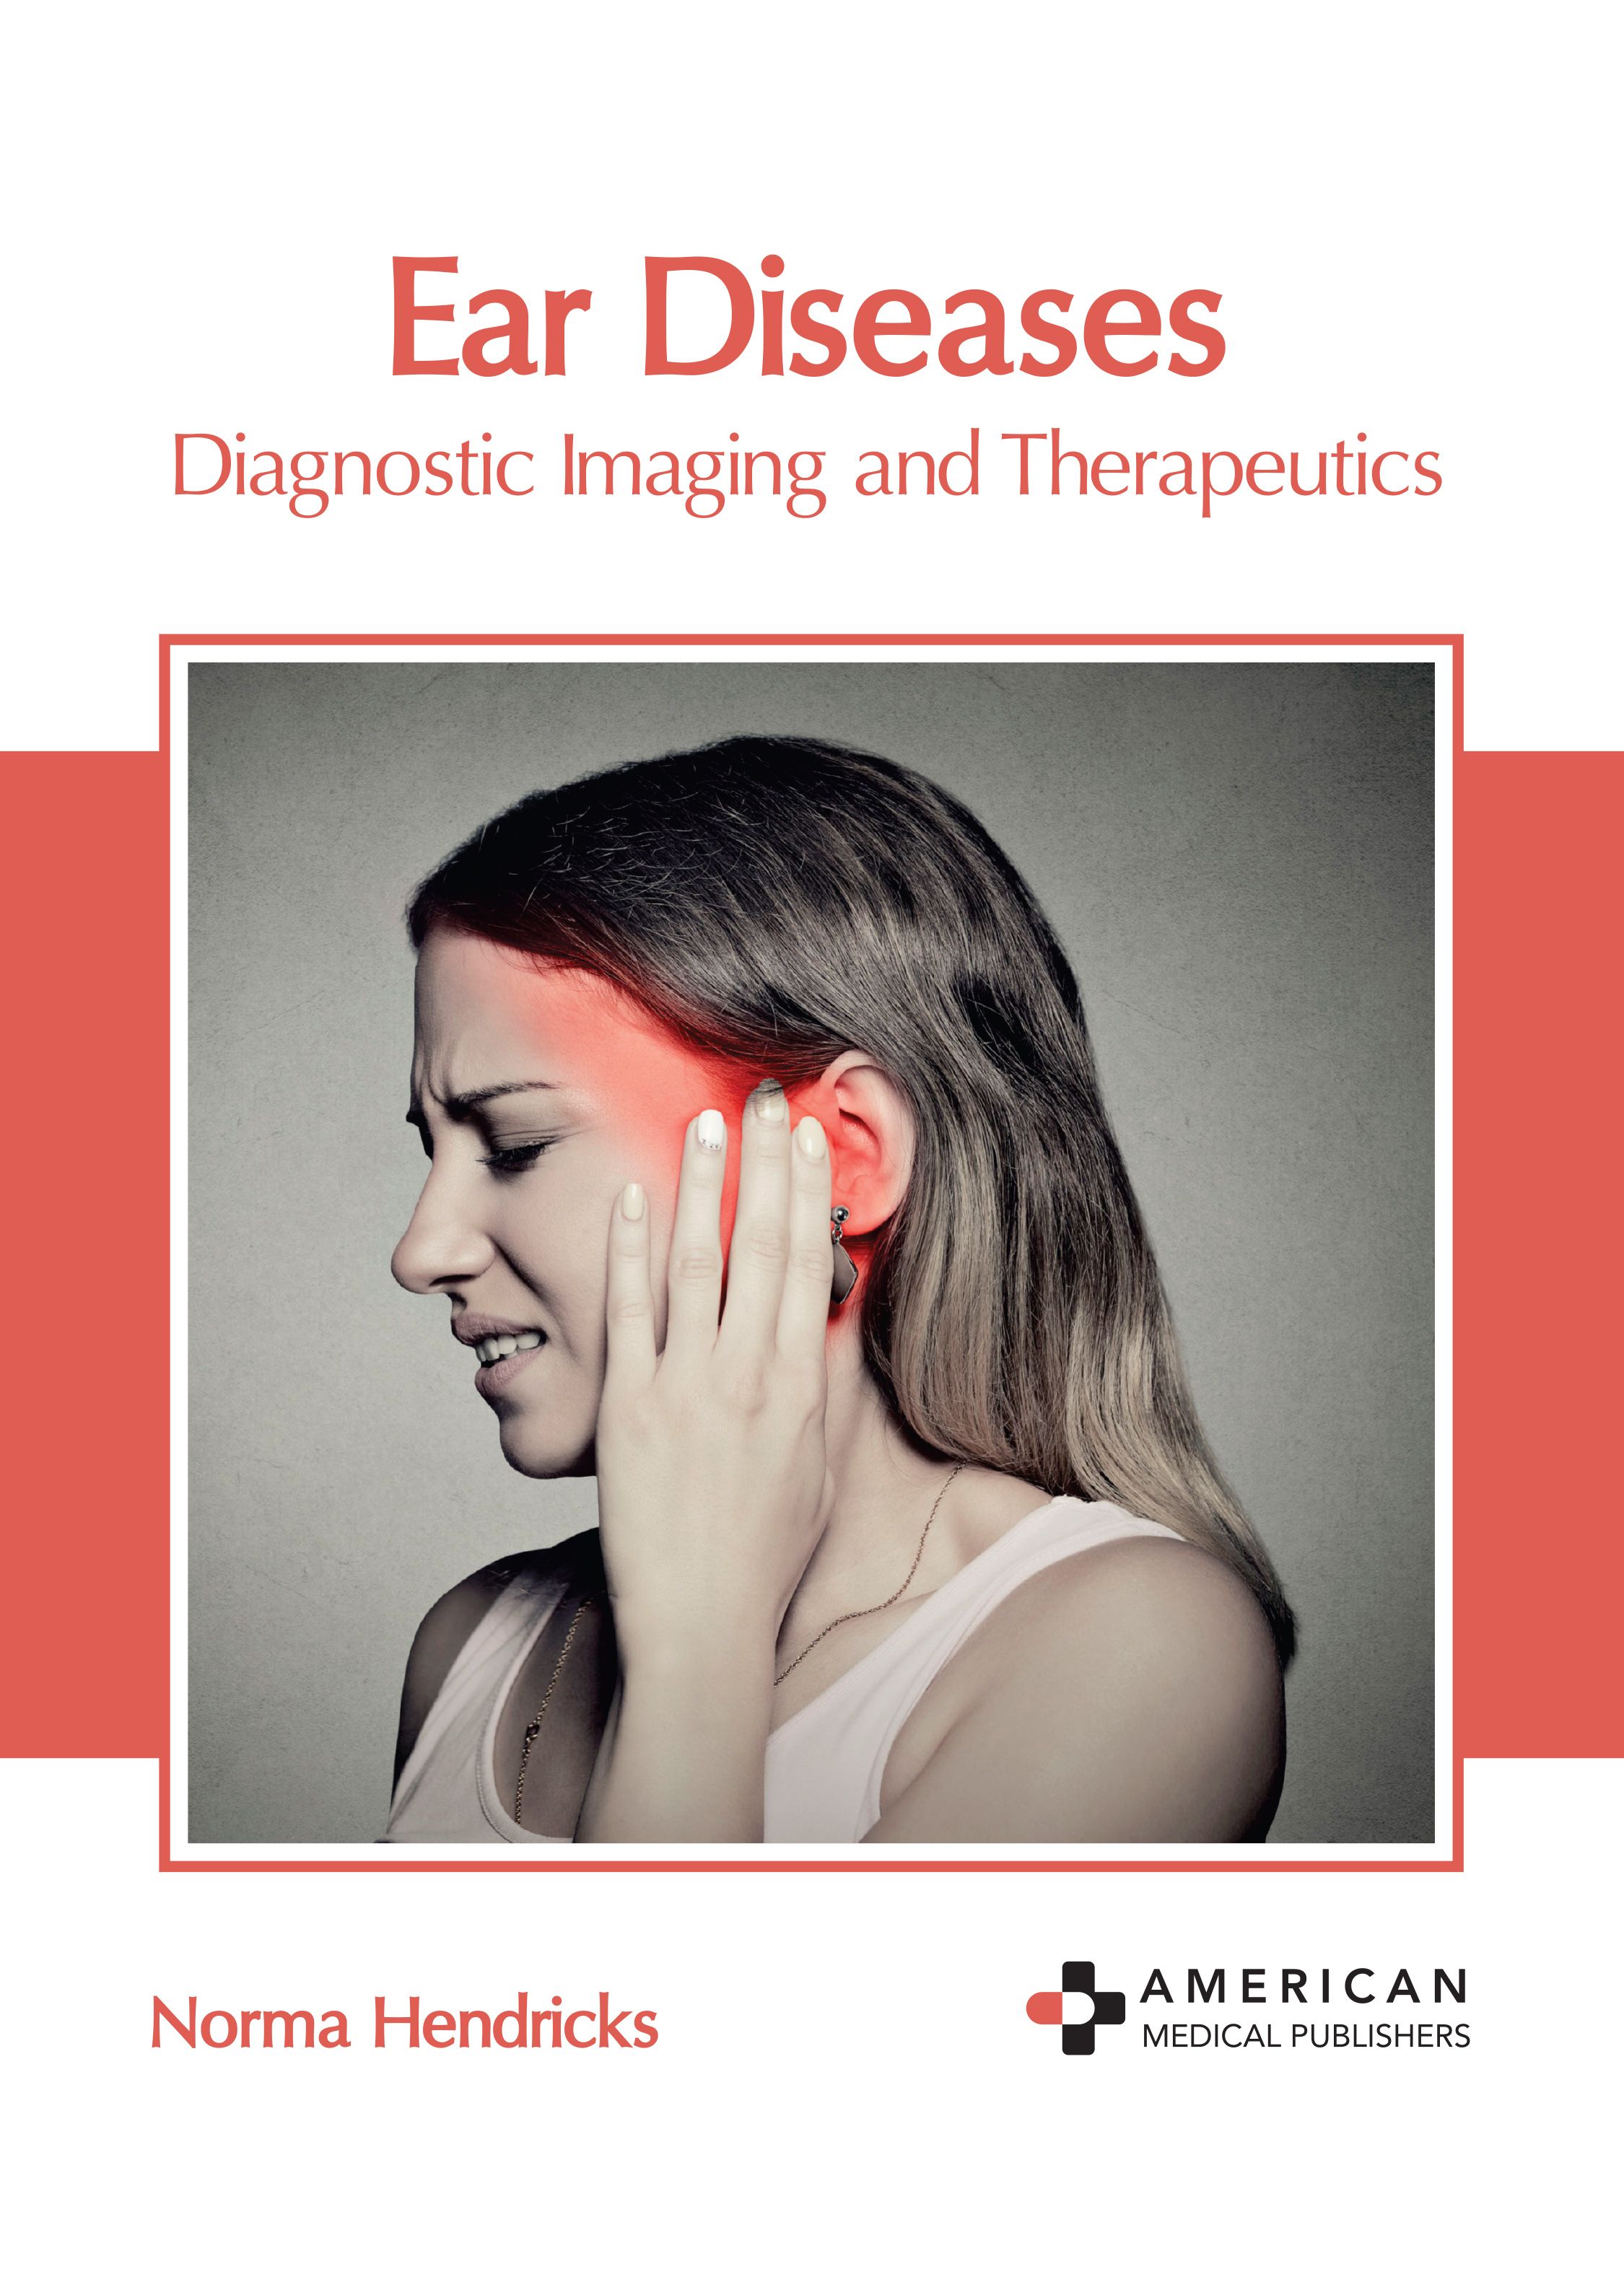 EAR DISEASES: DIAGNOSTIC IMAGING AND THERAPEUTICS